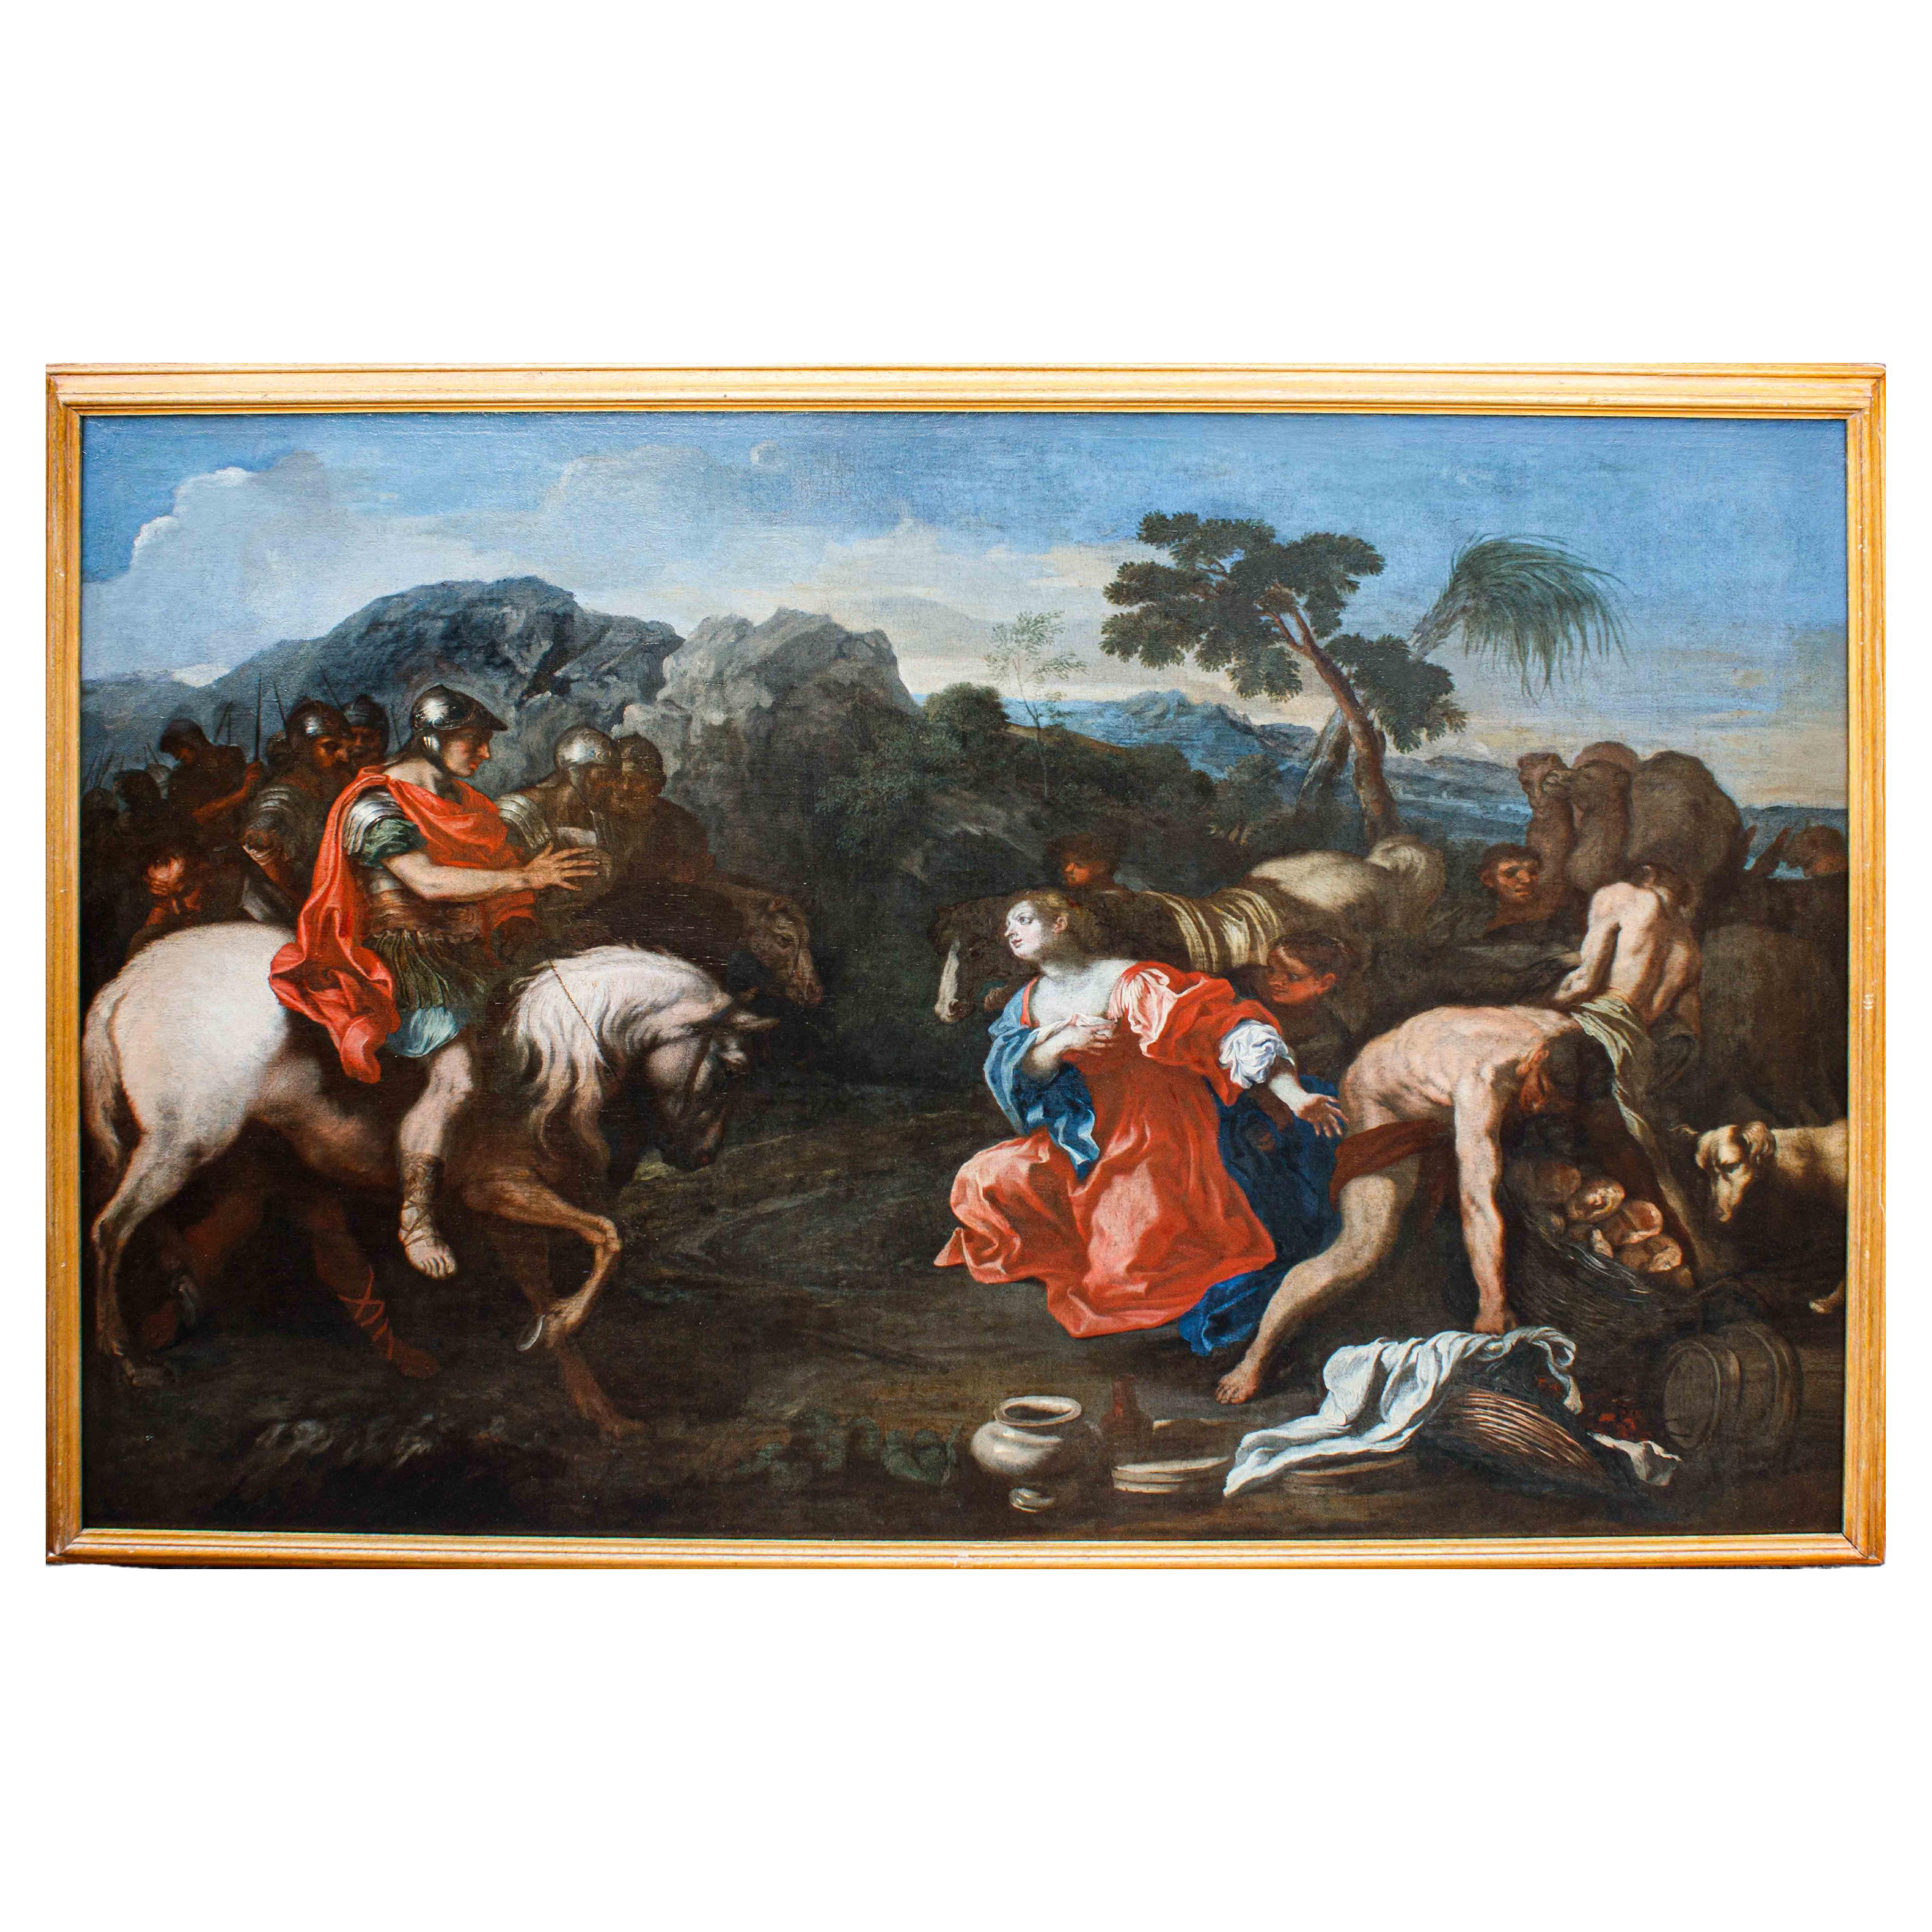 Biblical scene, oil on canvas, second half of the 17th century